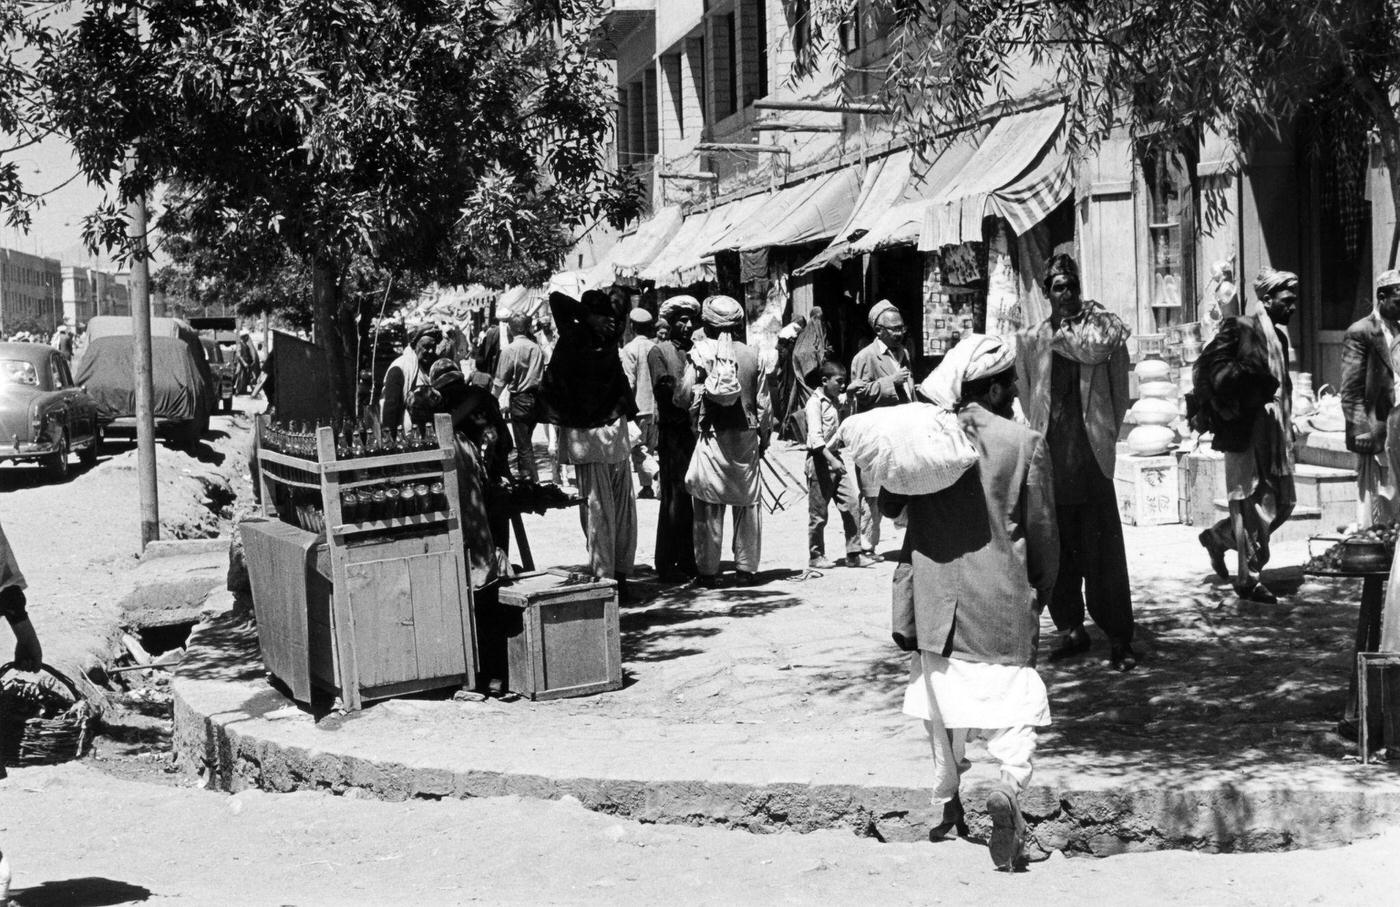 A general view of a Kabul street scene, circa 1950.